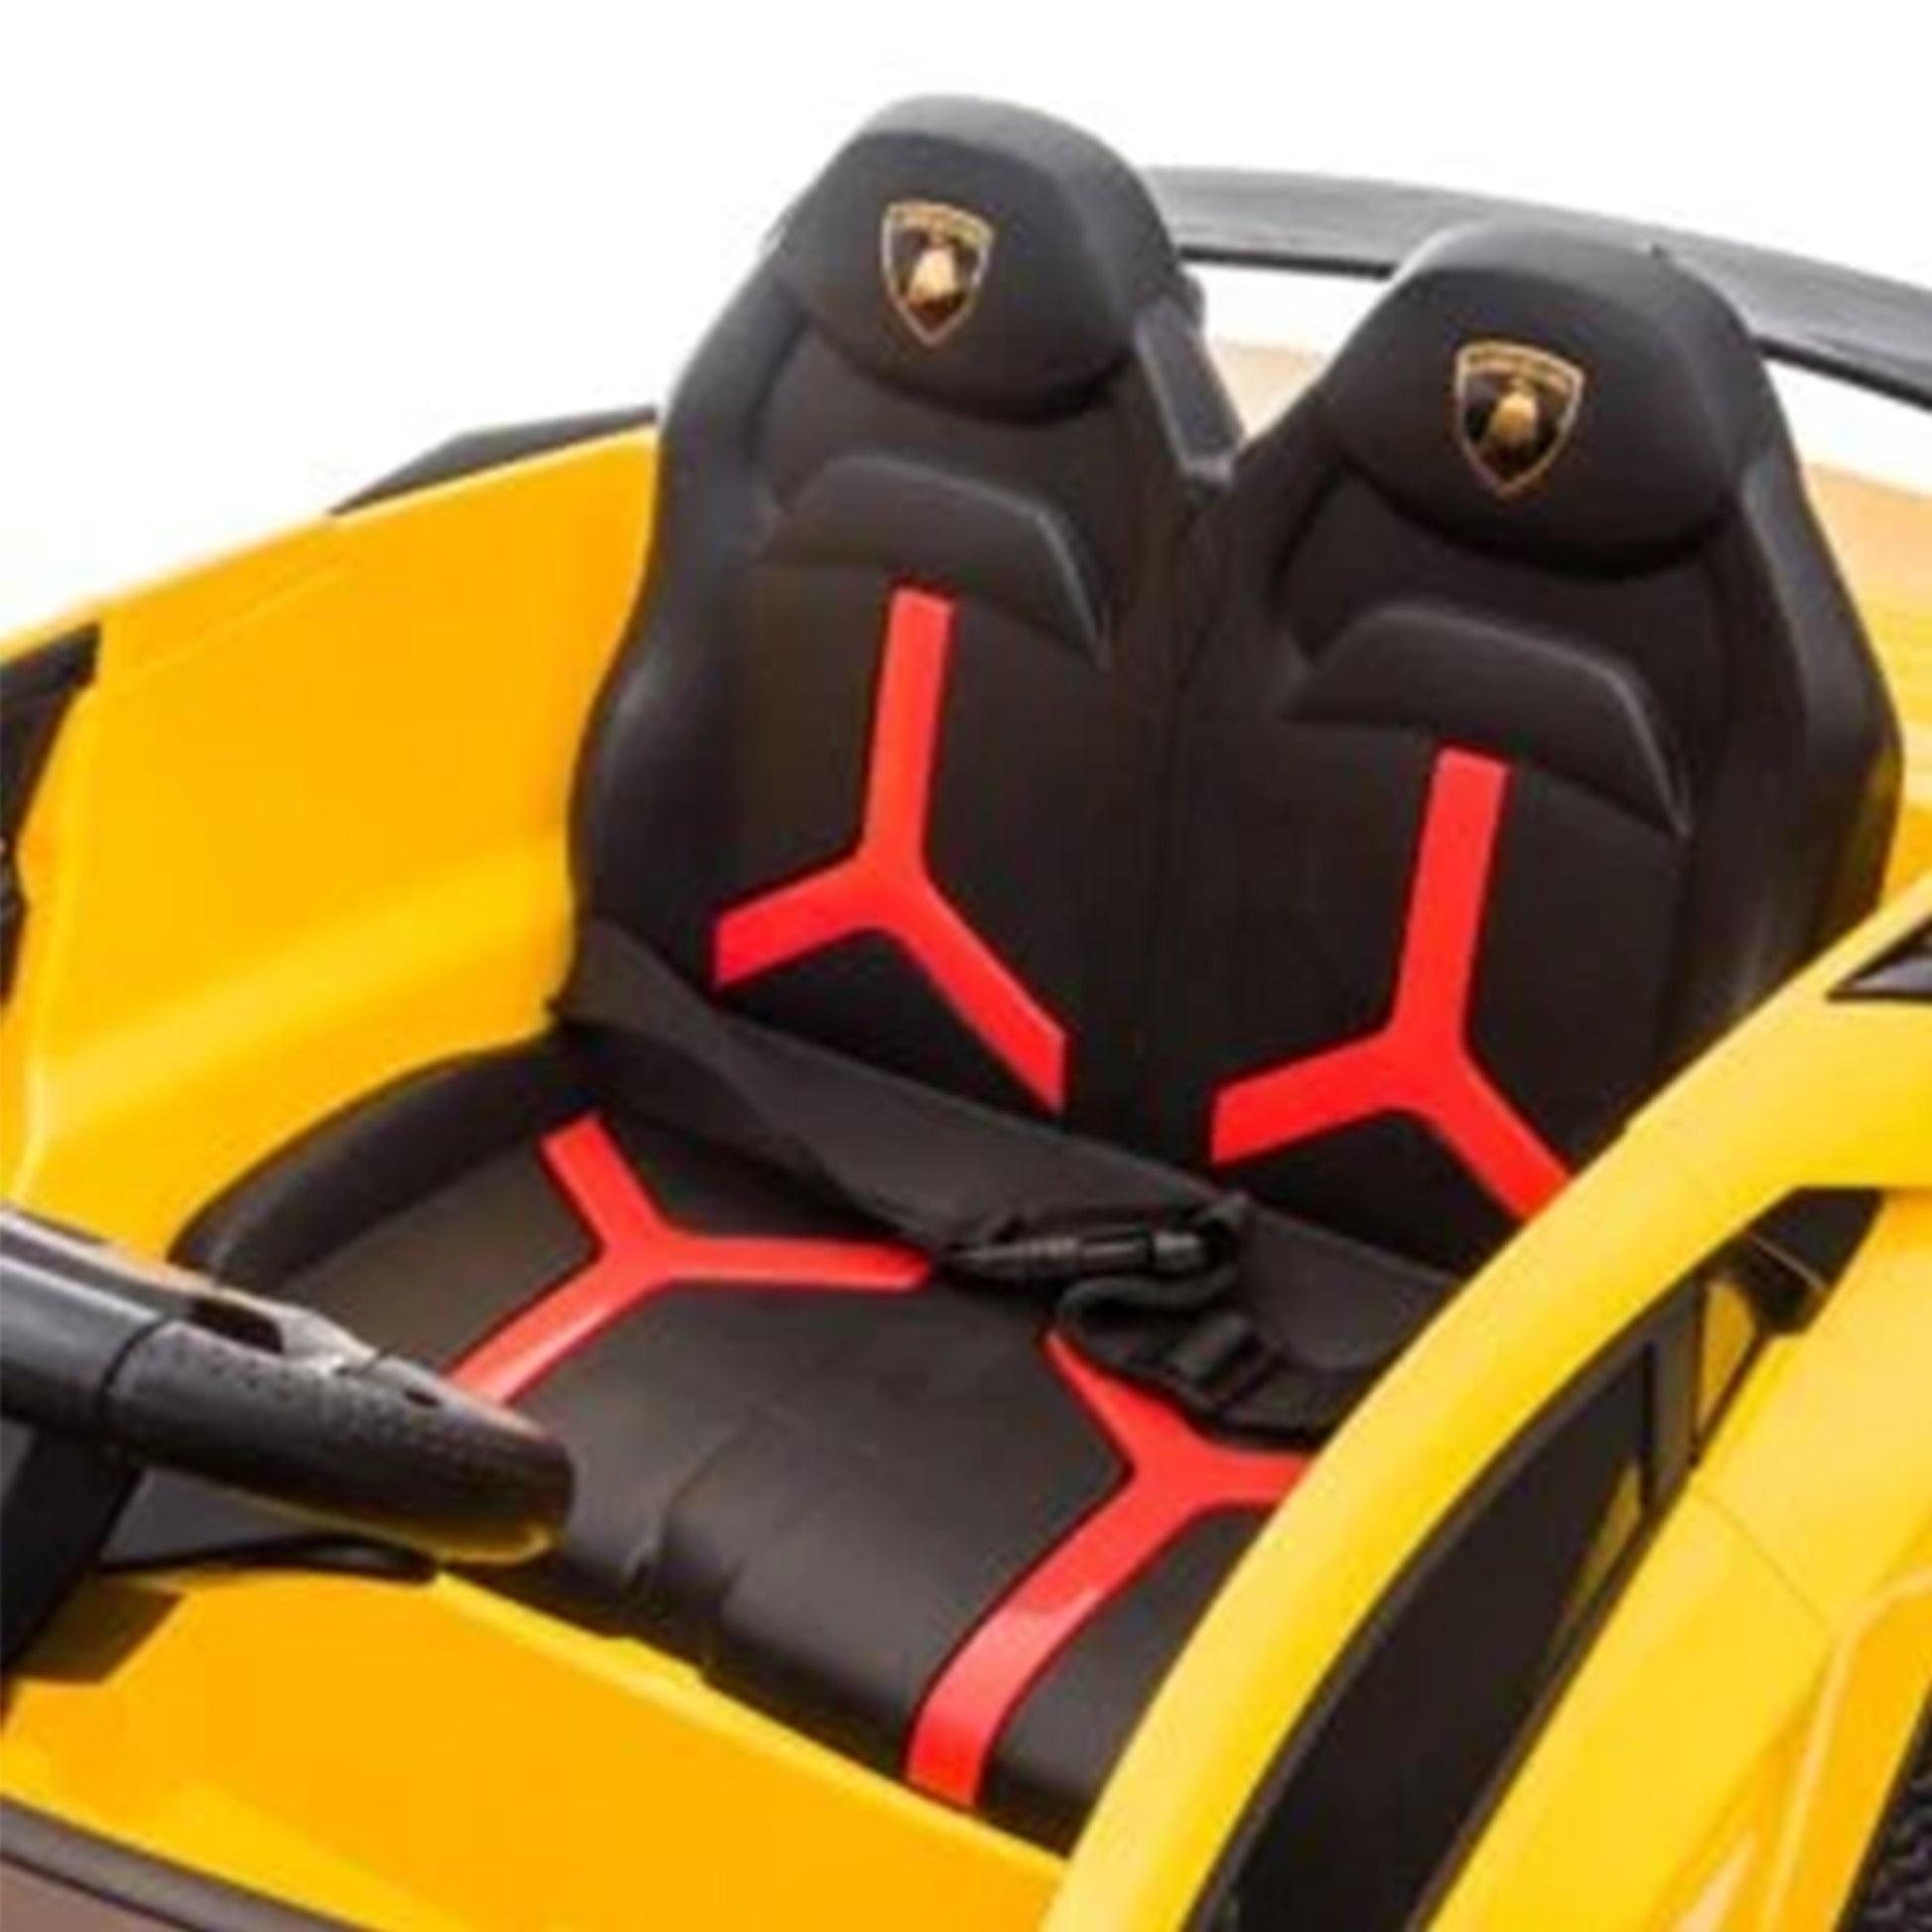 "Official LAMBORGHINI SVJ ride-on car from KidsCar.co.uk with remote parental control and leather seats."